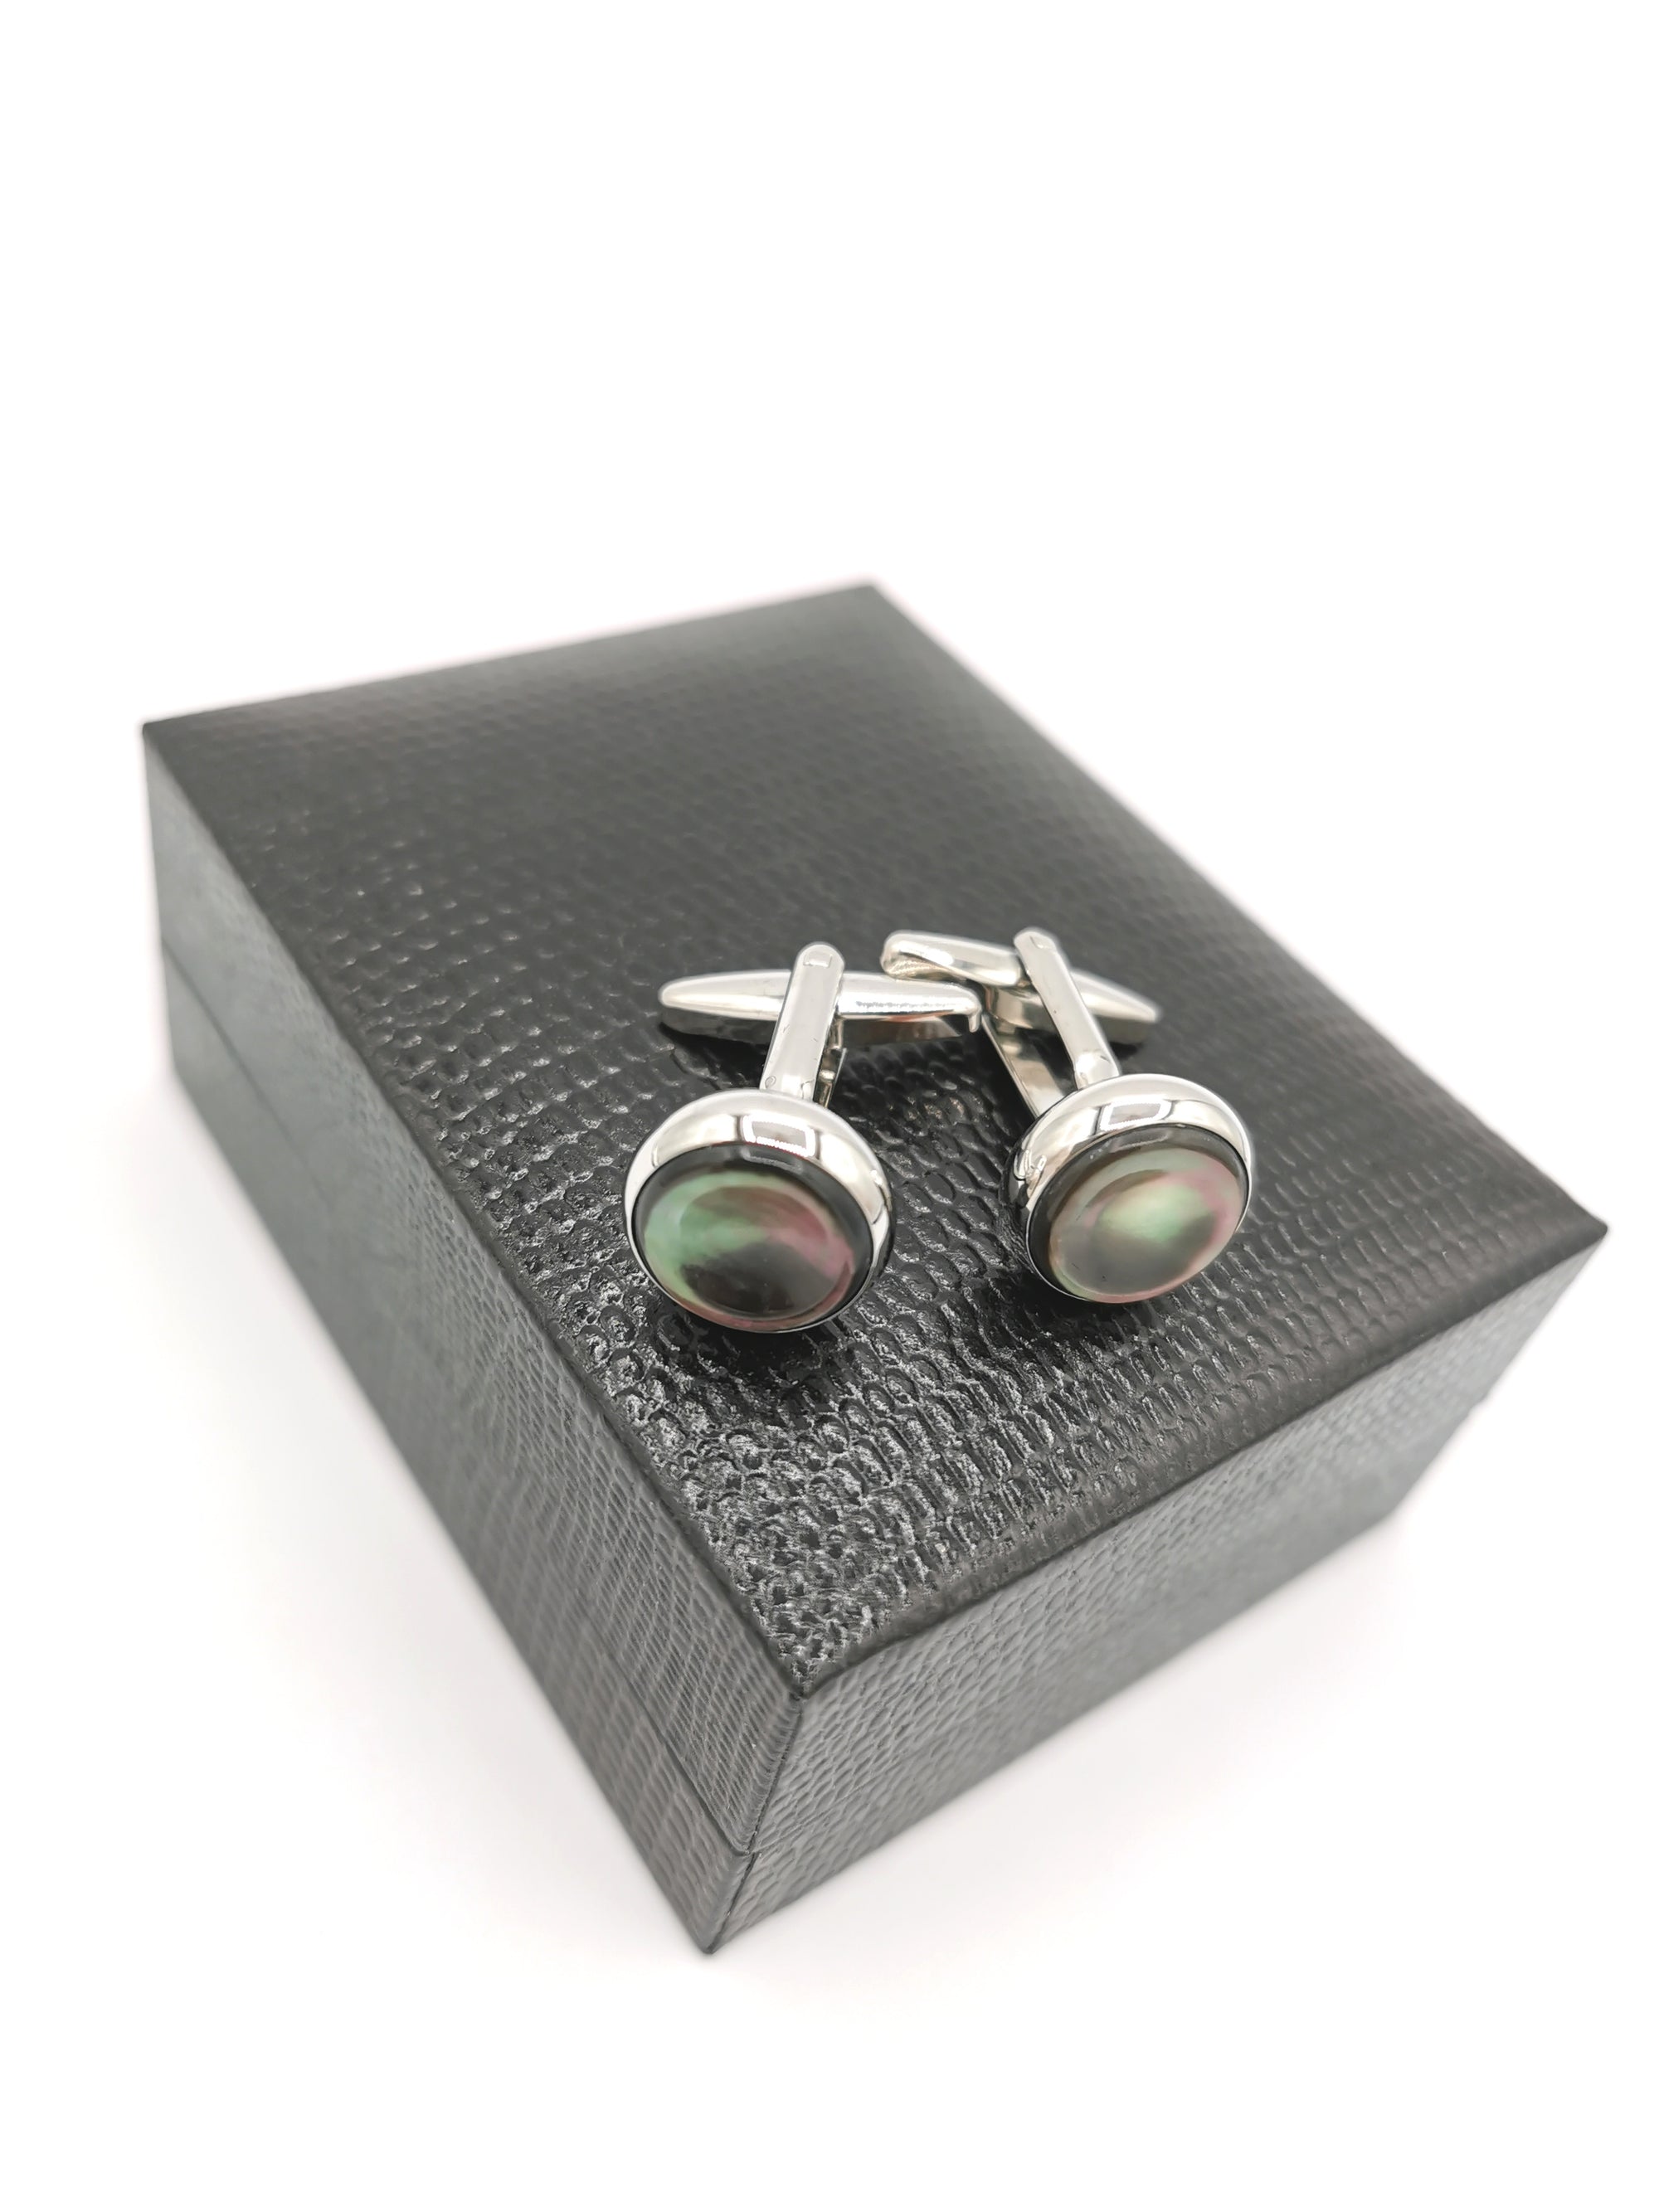 Round cufflinks with smoked mother-of-pearl insert